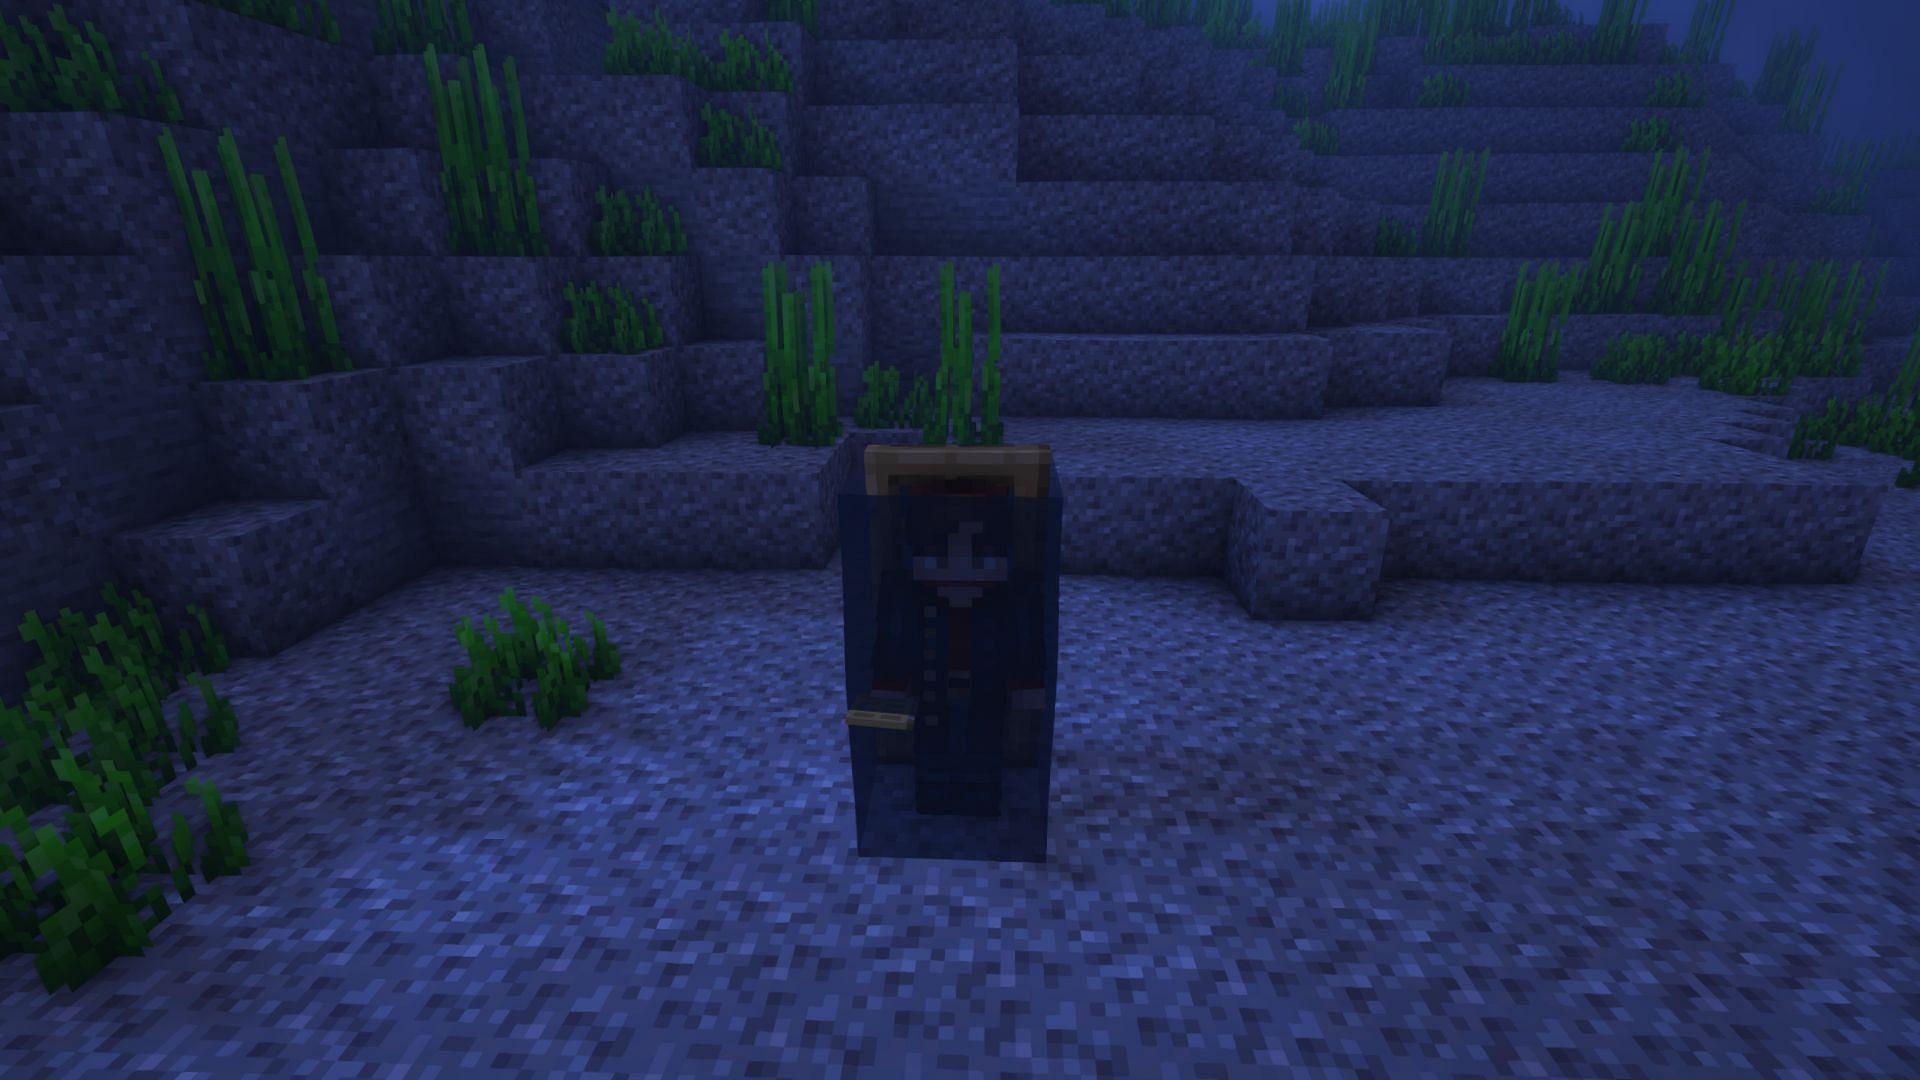 A player standing in the air gap created by the door (Image via Mojang)